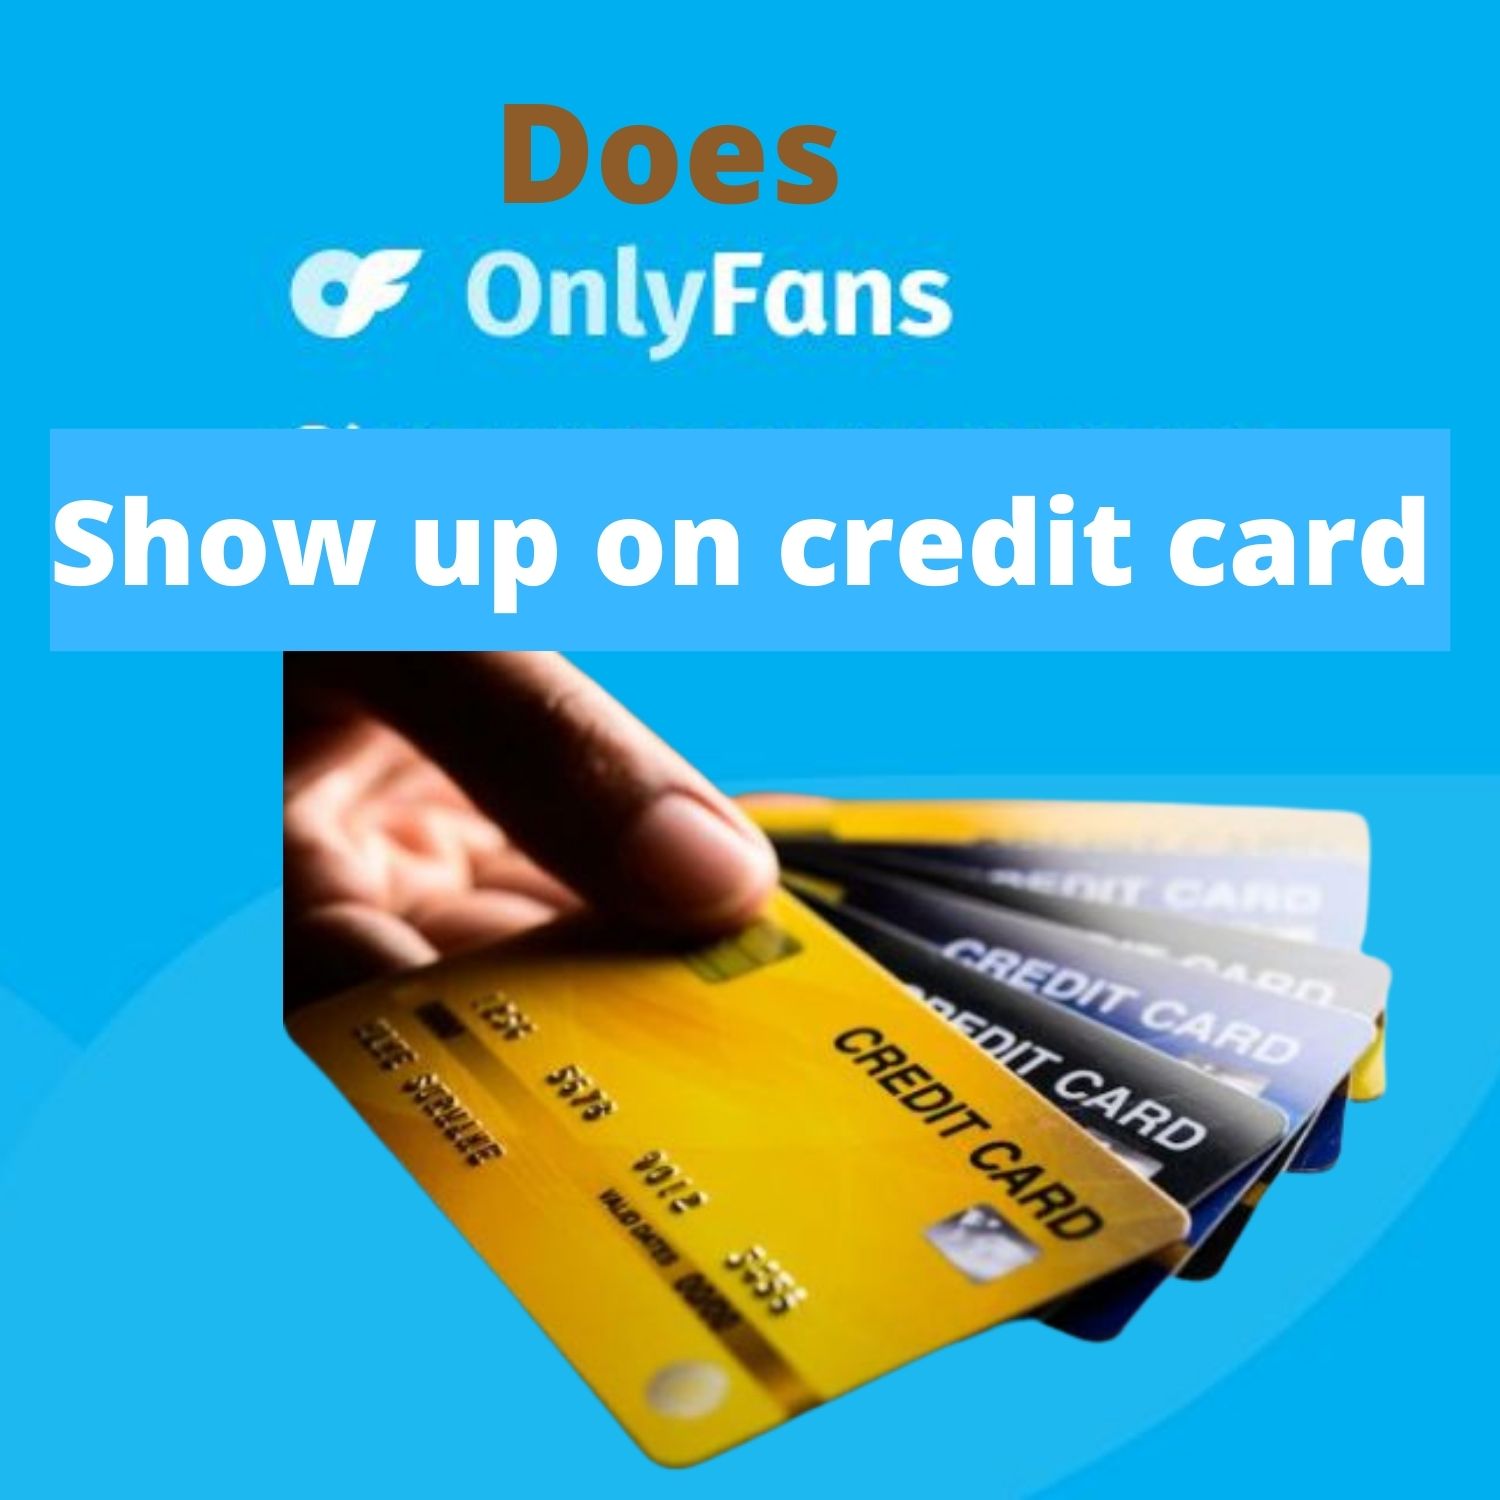 Does onlyfans show up on credit card statement?